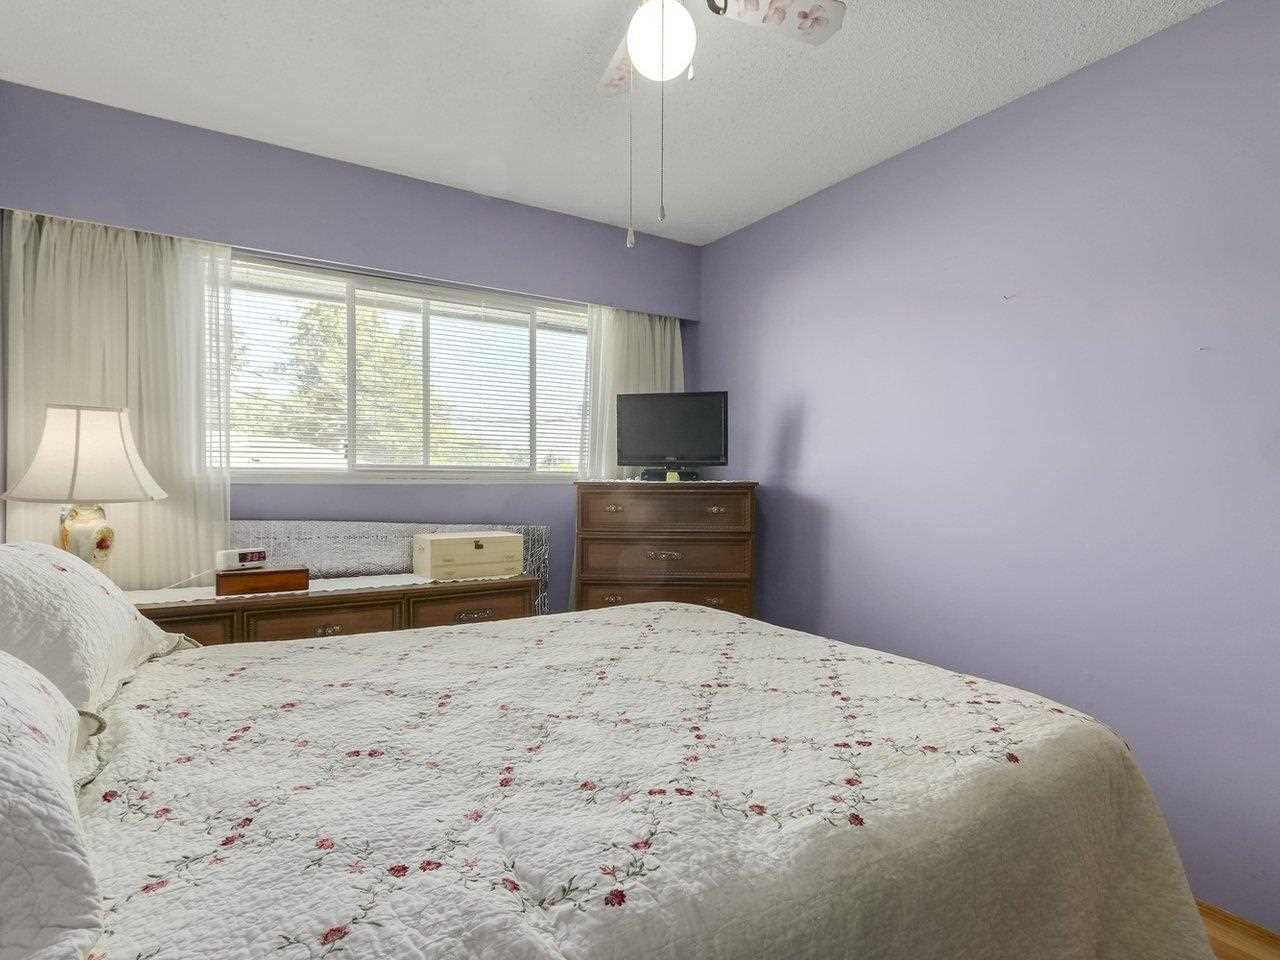 Photo 15: Photos: 680 - 682 SPERLING Avenue in Burnaby: Sperling-Duthie Duplex for sale (Burnaby North)  : MLS®# R2589206